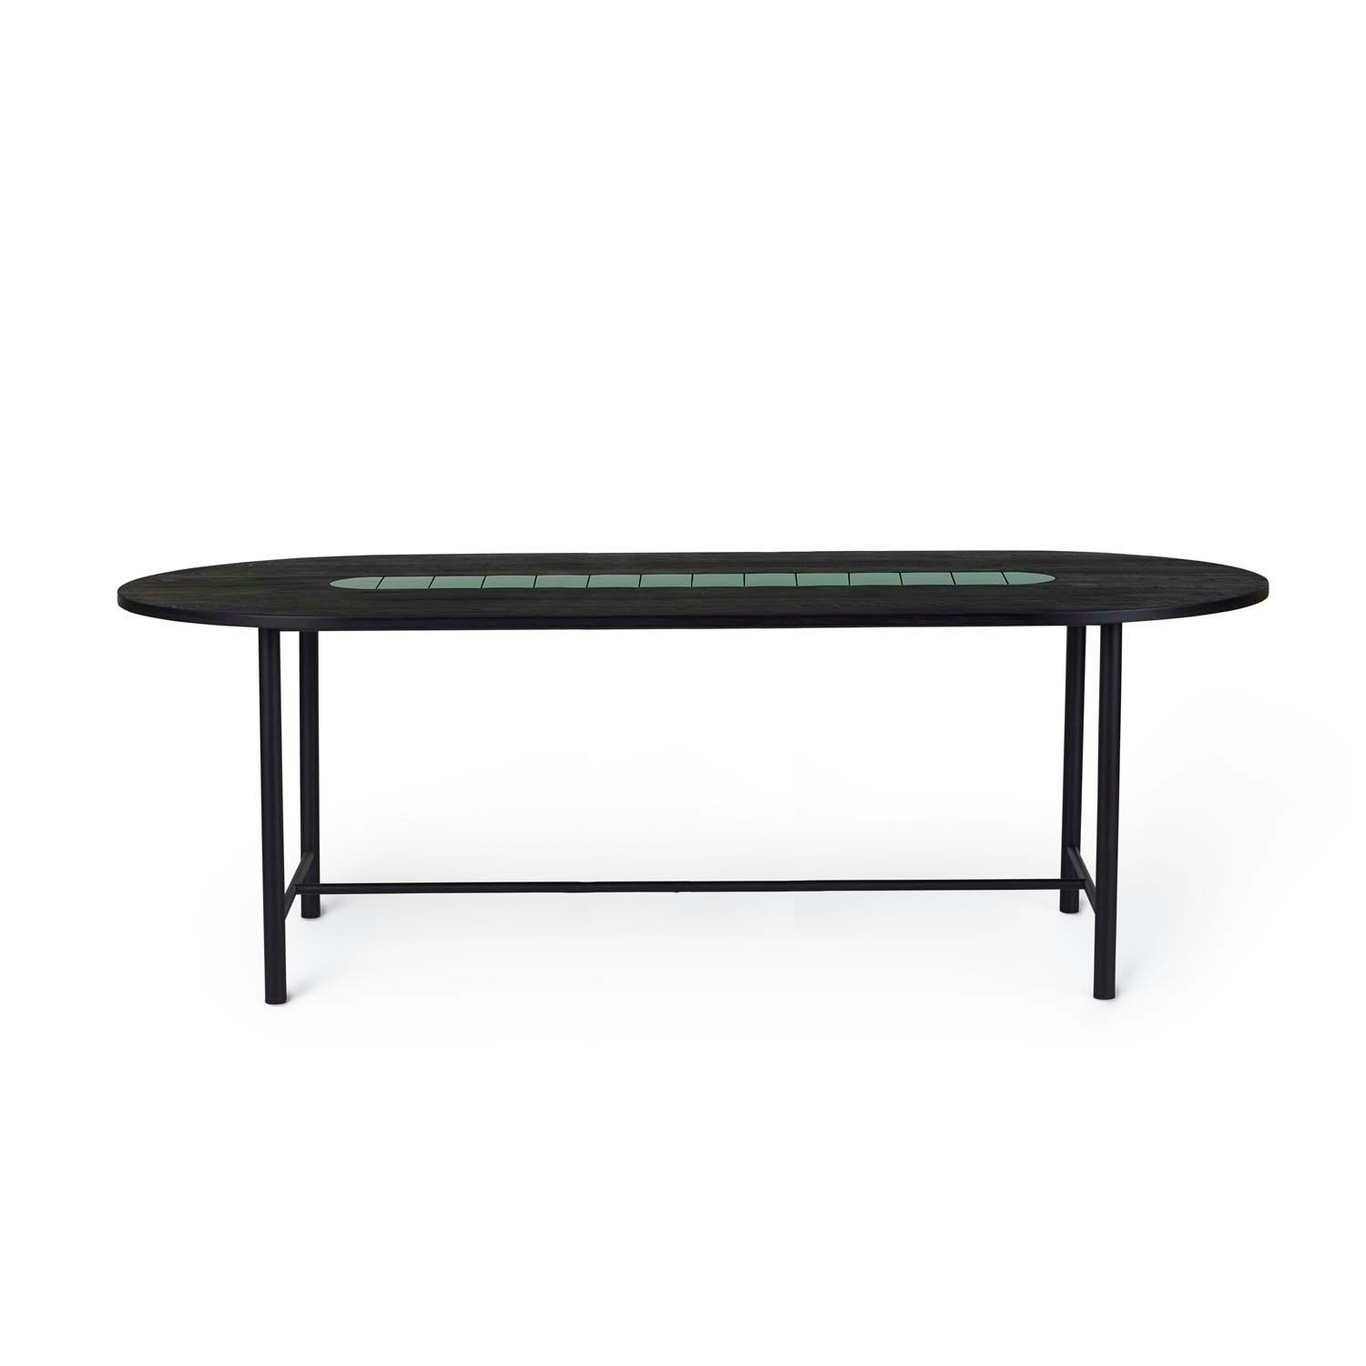 Be My Guest Dining Table 220 cm, Black Oiled Oak / Forest Green